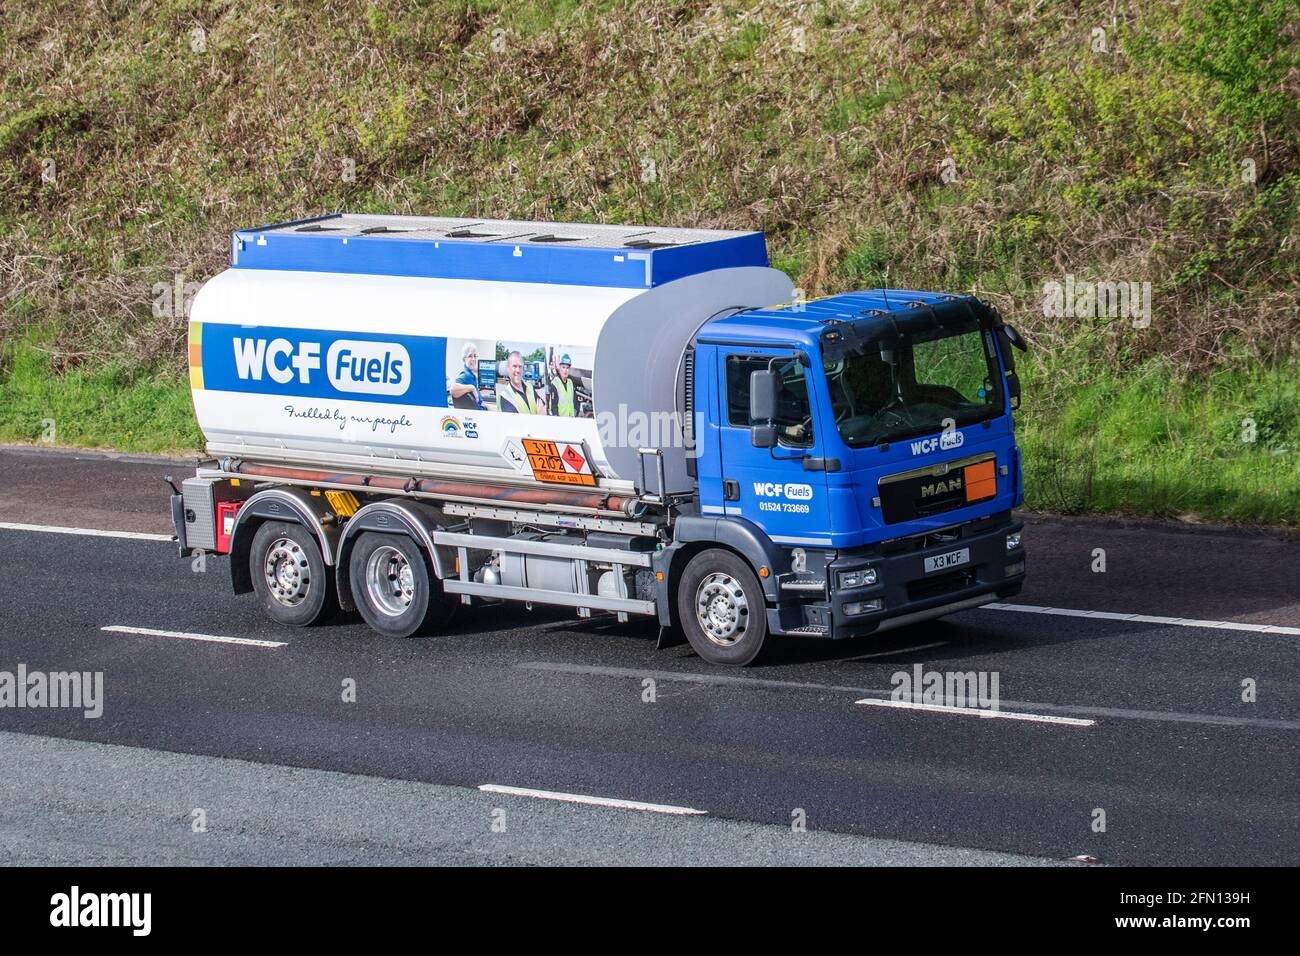 WCF Fuels North West; an independent fuel distribution business delivering domestic, agricultural and commercial fuels across Lancashire, UK Stock Photo